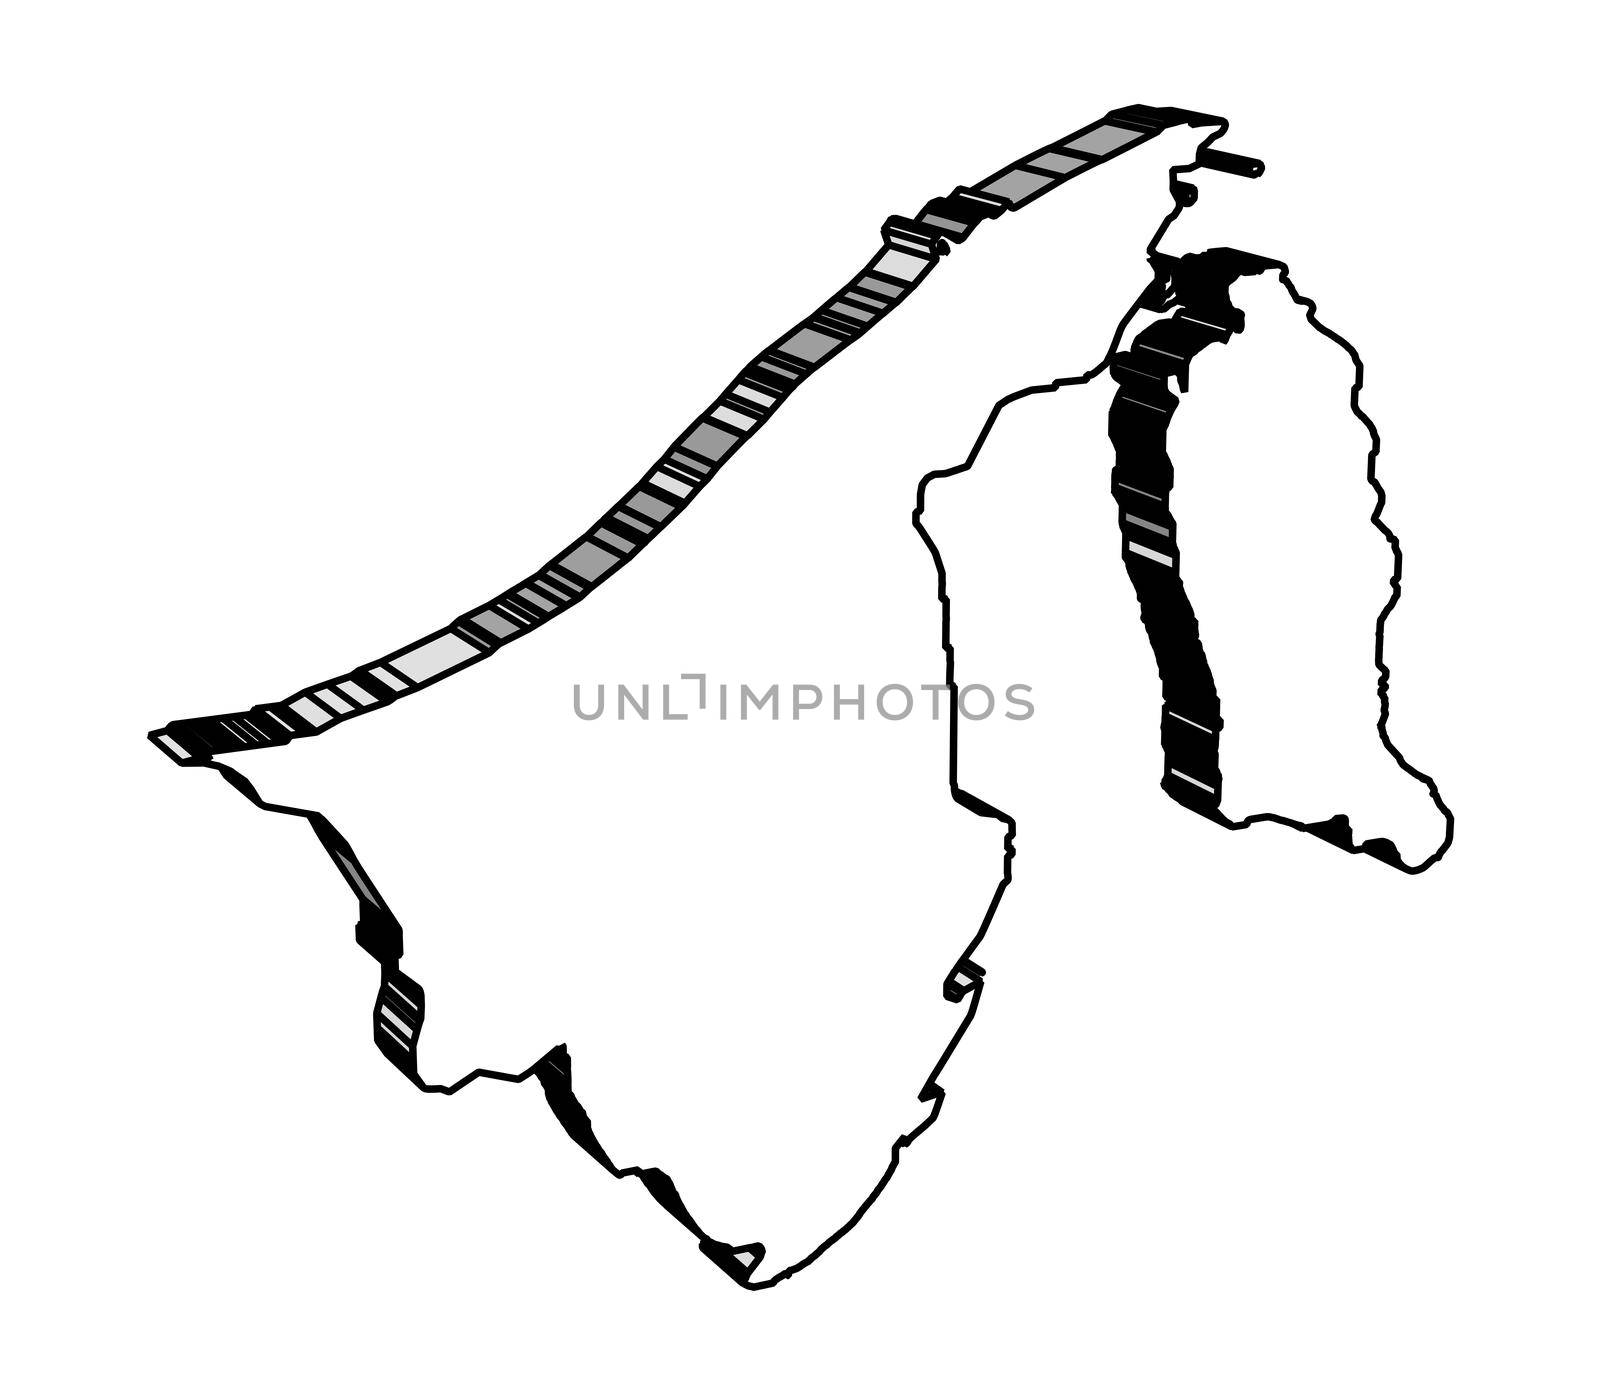 Outline silhouette 3D map of the Asian country of Brunei set over a white background